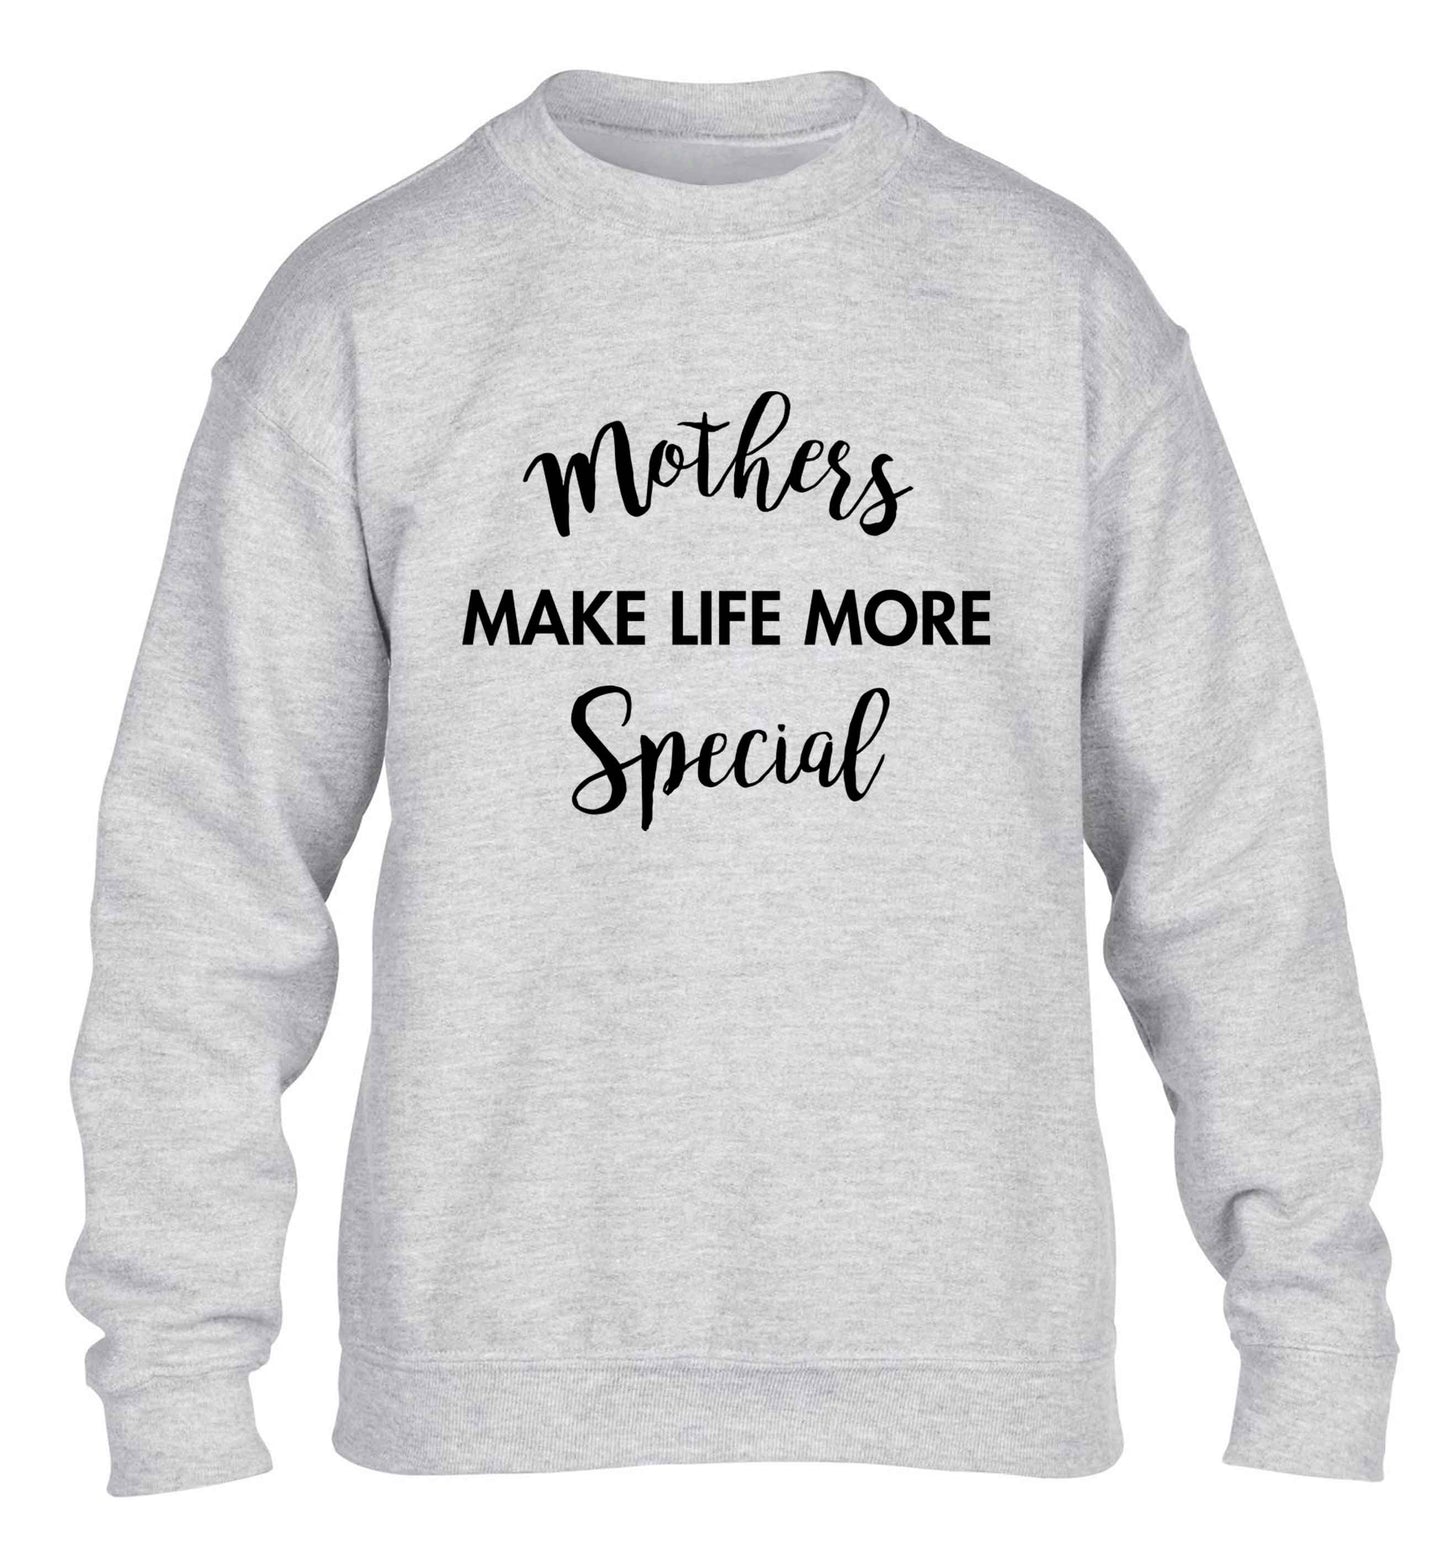 Mother's make life more special children's grey sweater 12-13 Years